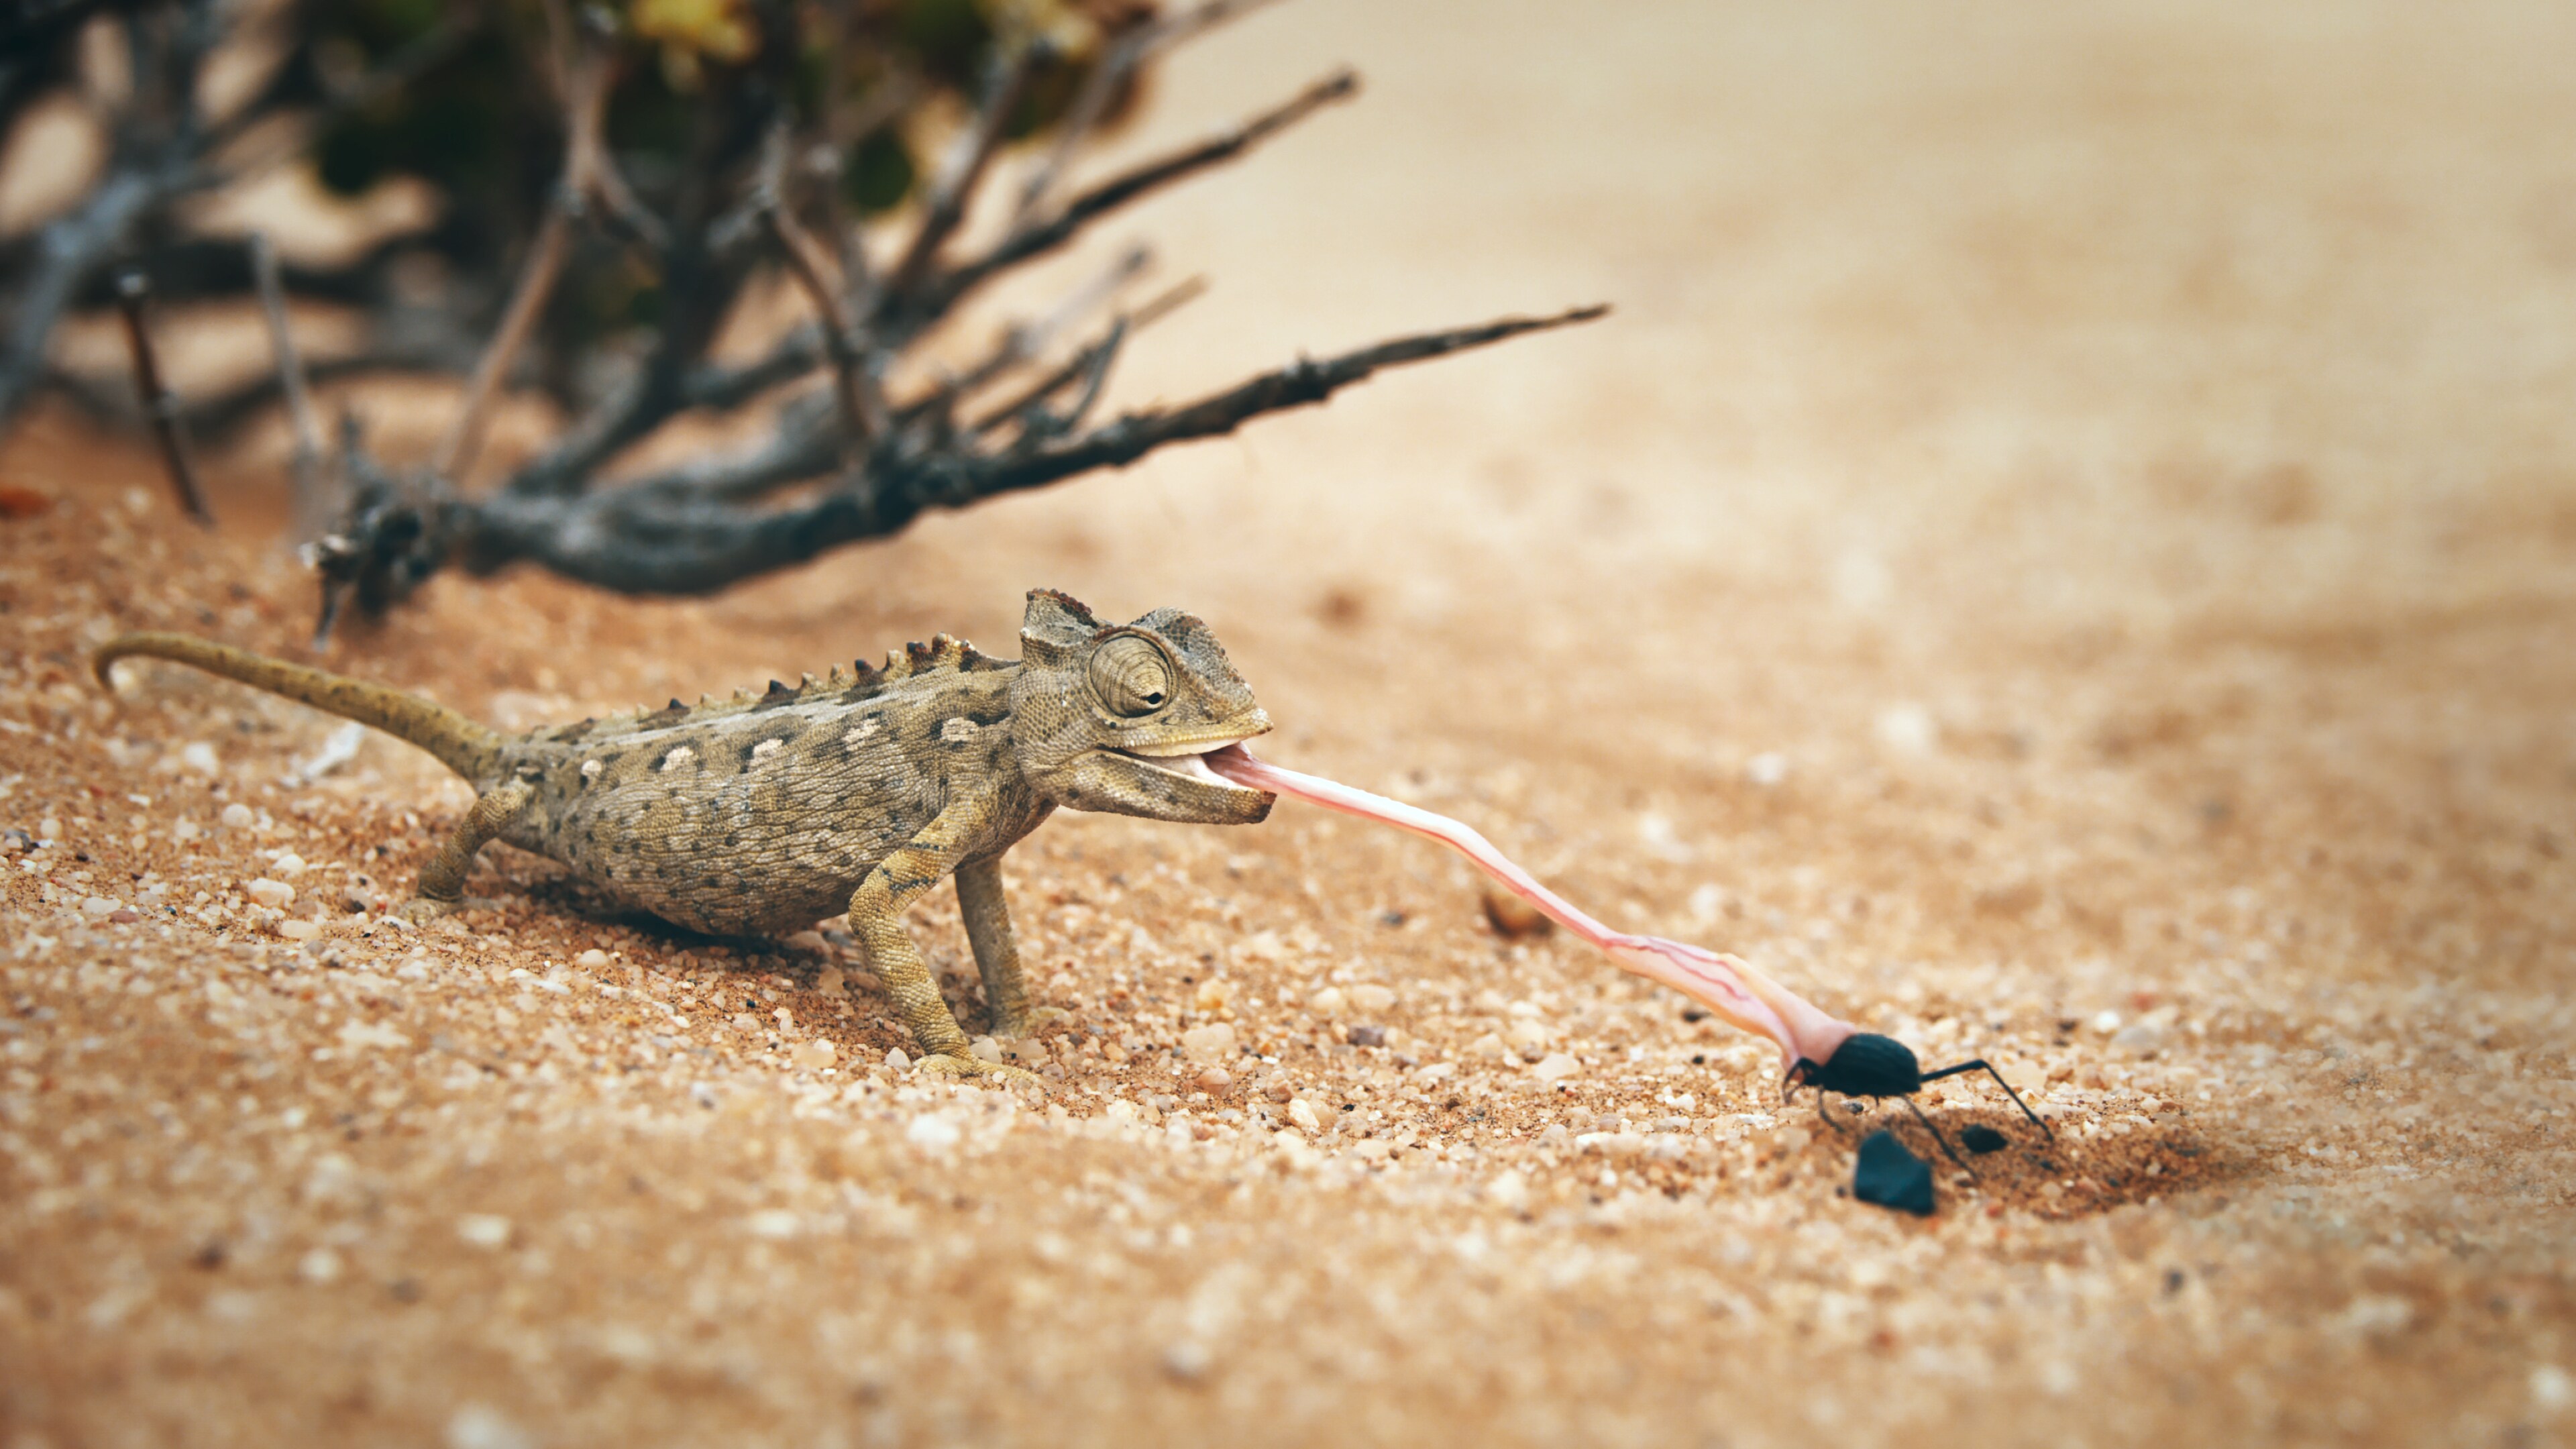 A chameleon eats a bug in the Namib Desert in Namibia.  (National Geographic for Disney+)